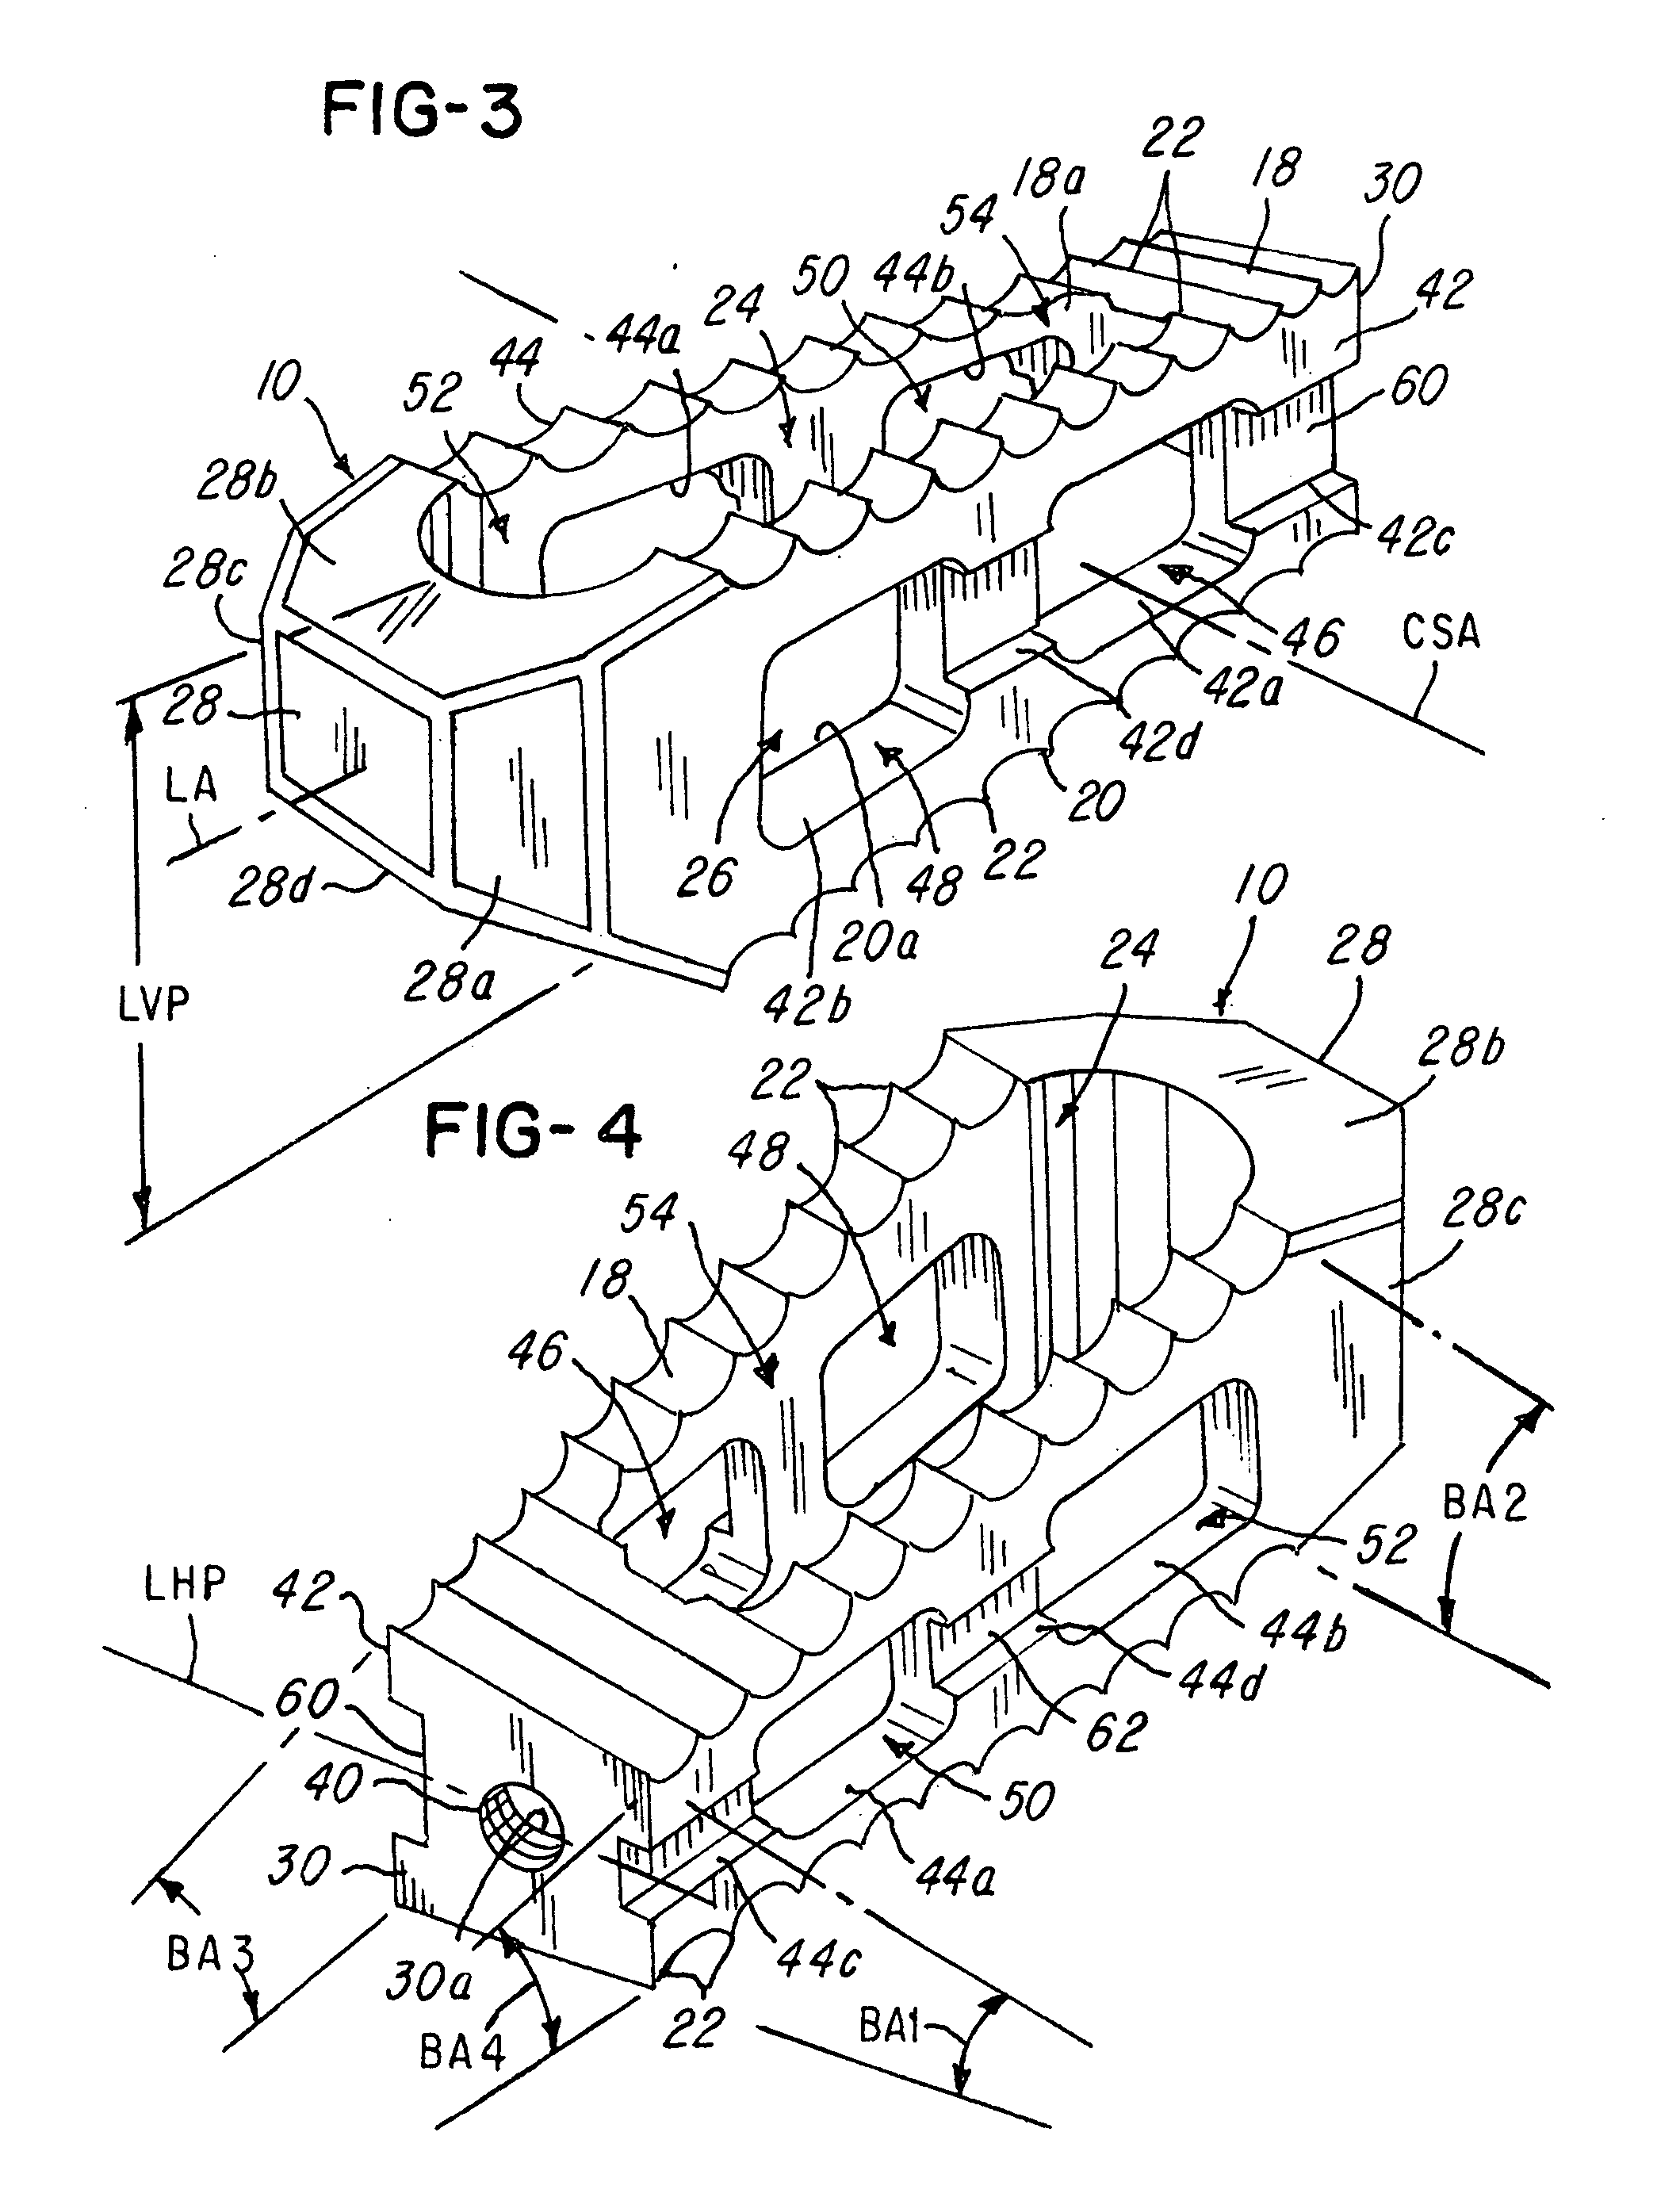 Prosthetic implant with biplanar angulation and compound angles